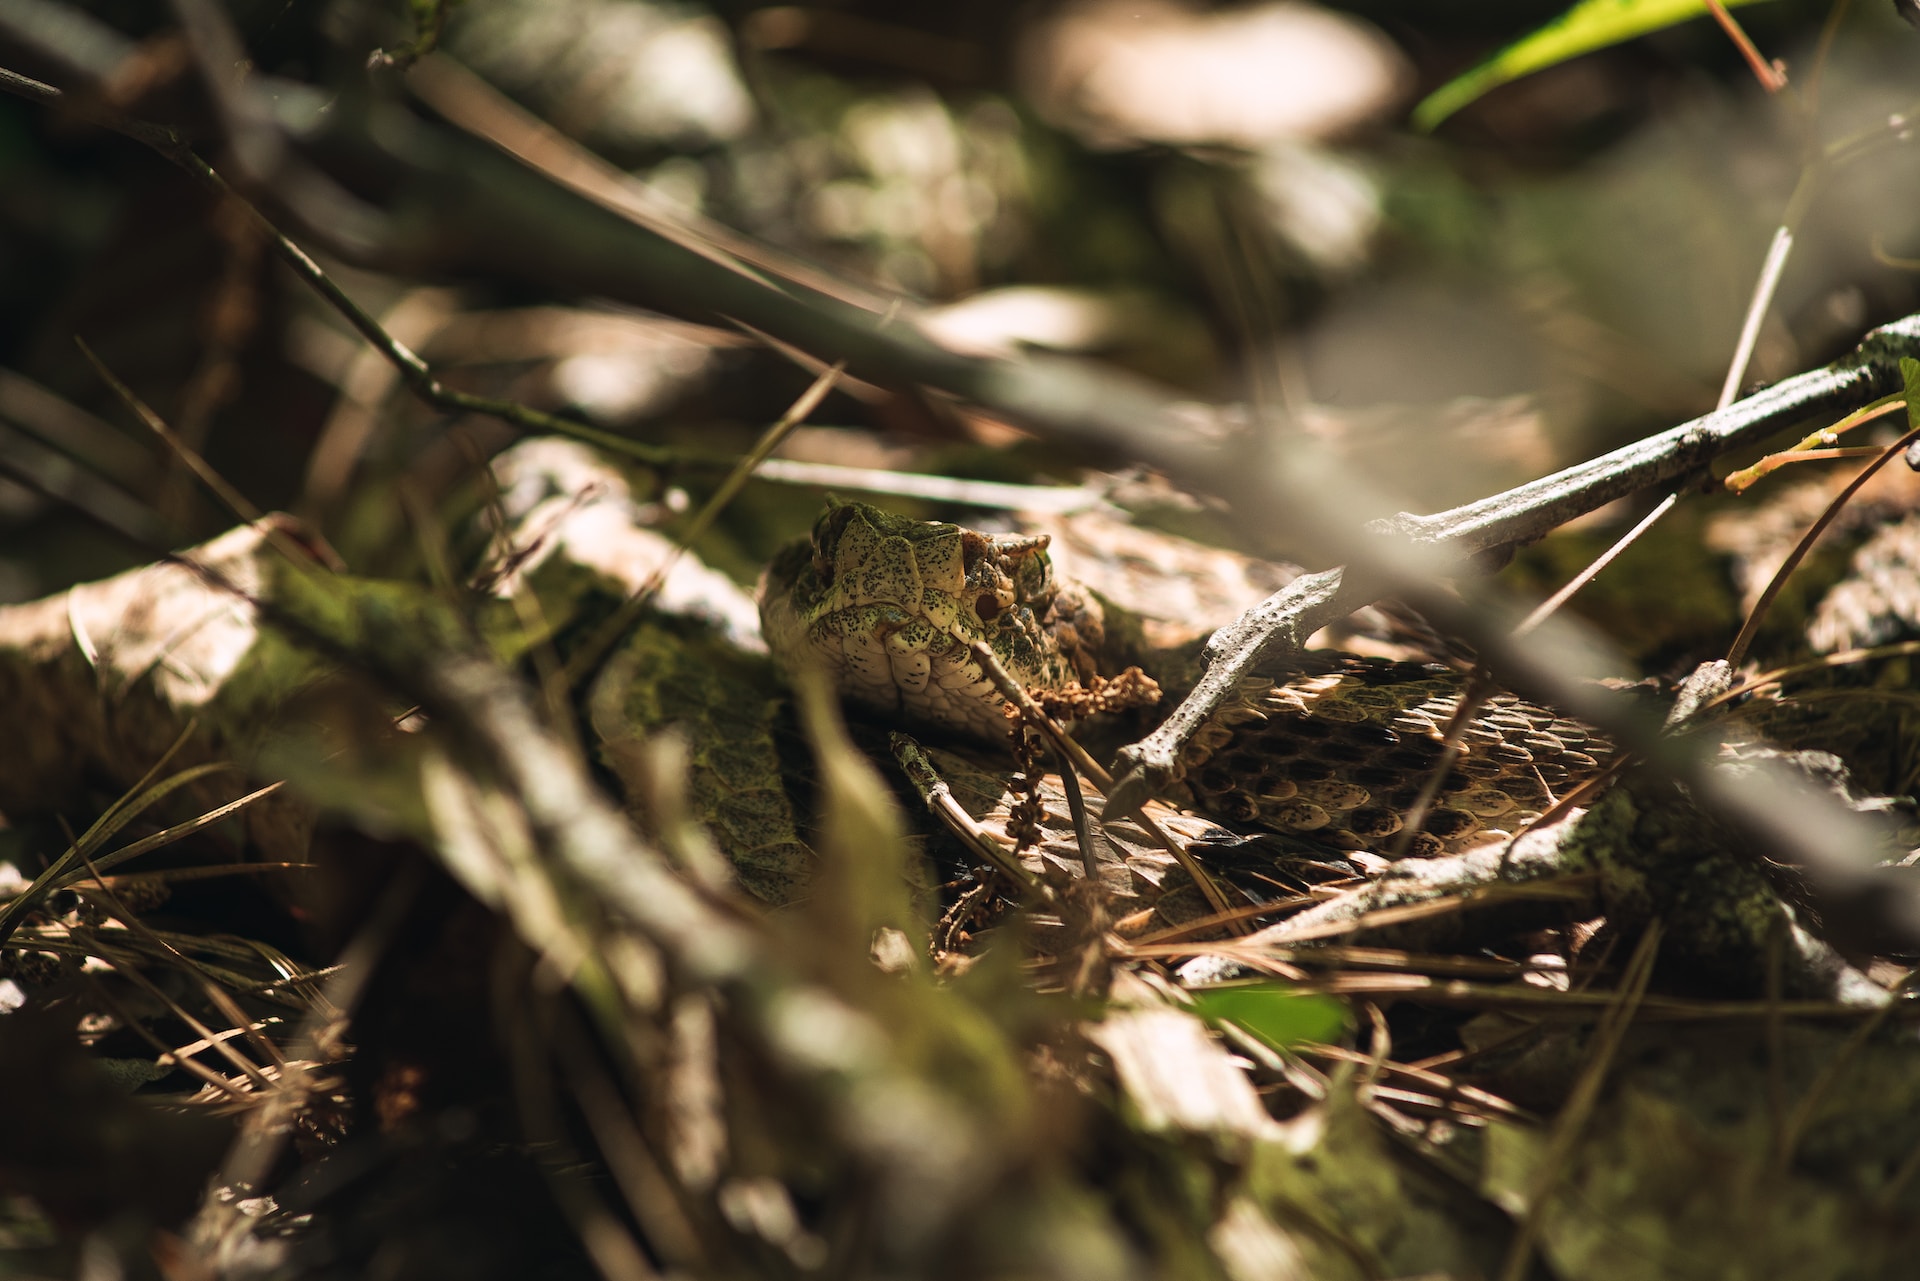 Learn more about the snakes in South Carolina to maximize your stay in the outdoors!